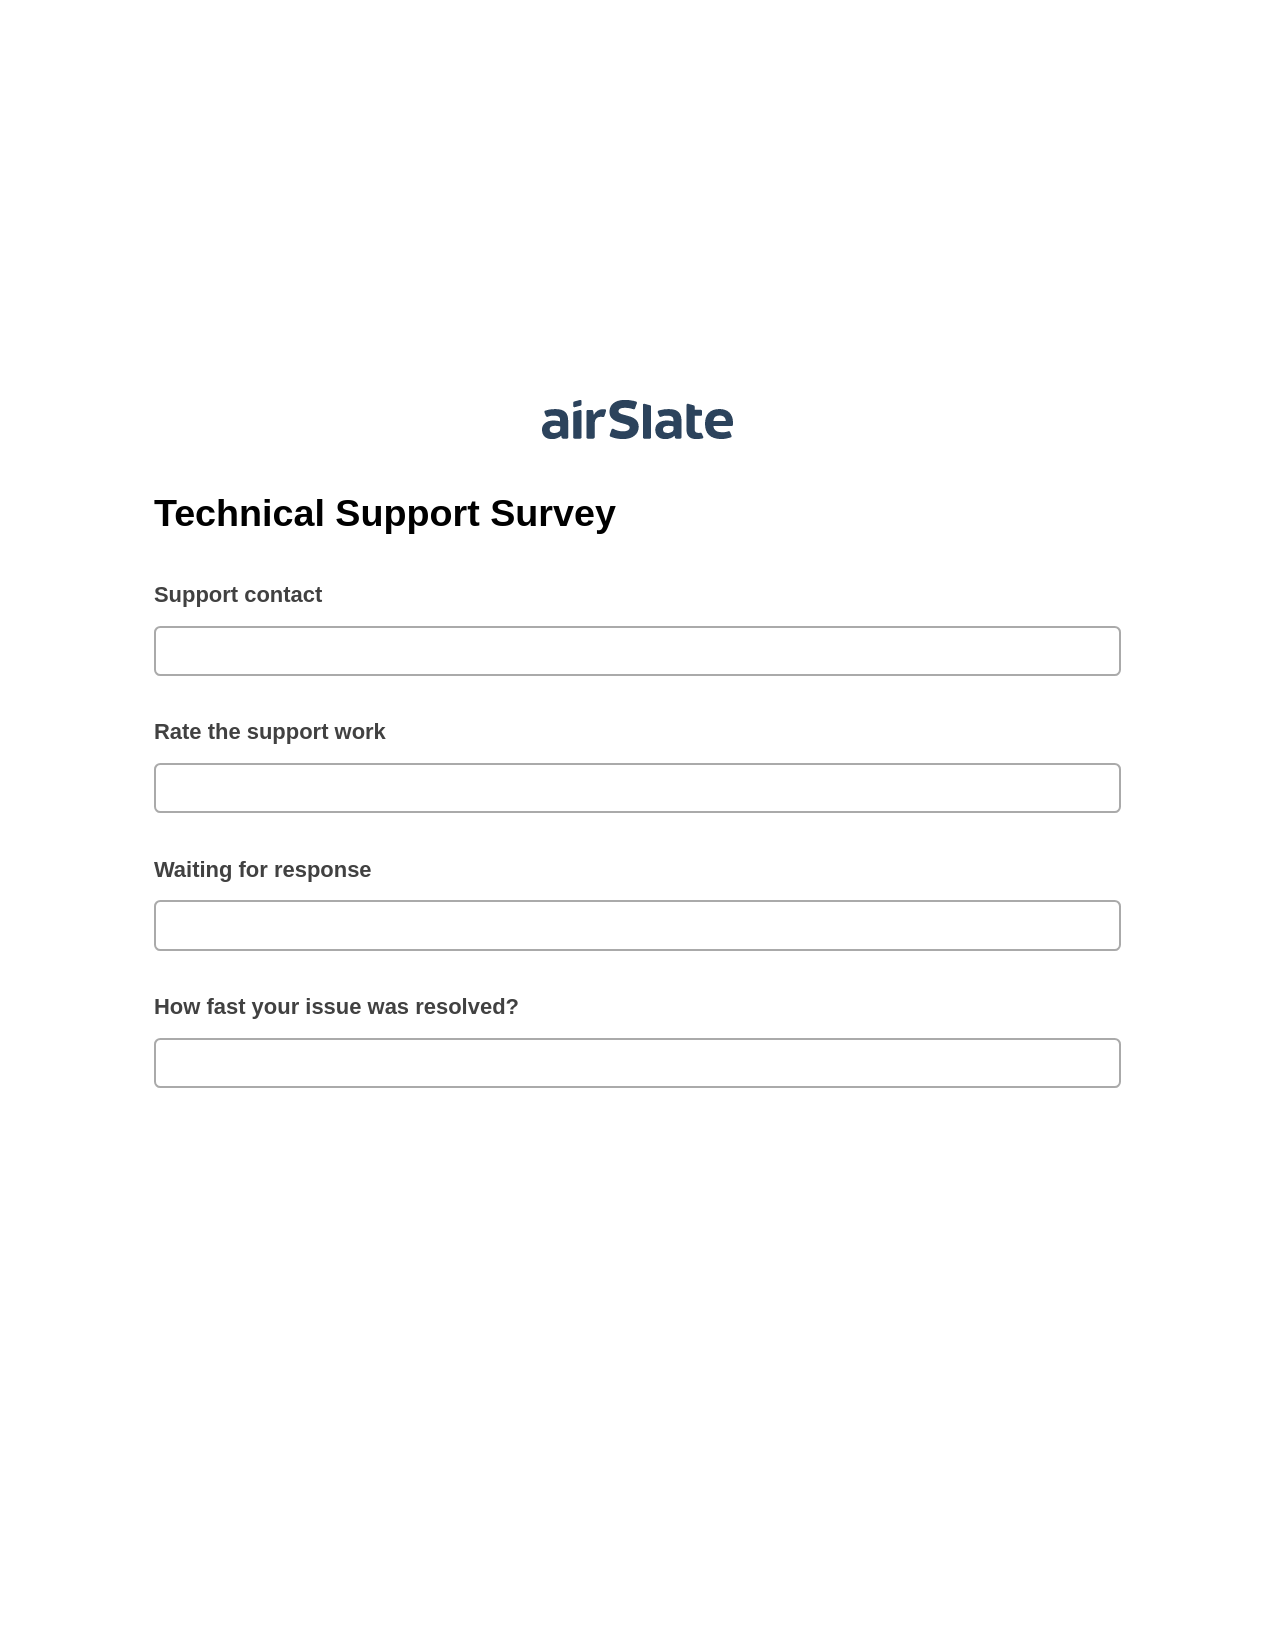 Multirole Technical Support Survey Pre-fill from Salesforce Records with SOQL Bot, Revoke Access Bot, Export to Google Sheet Bot